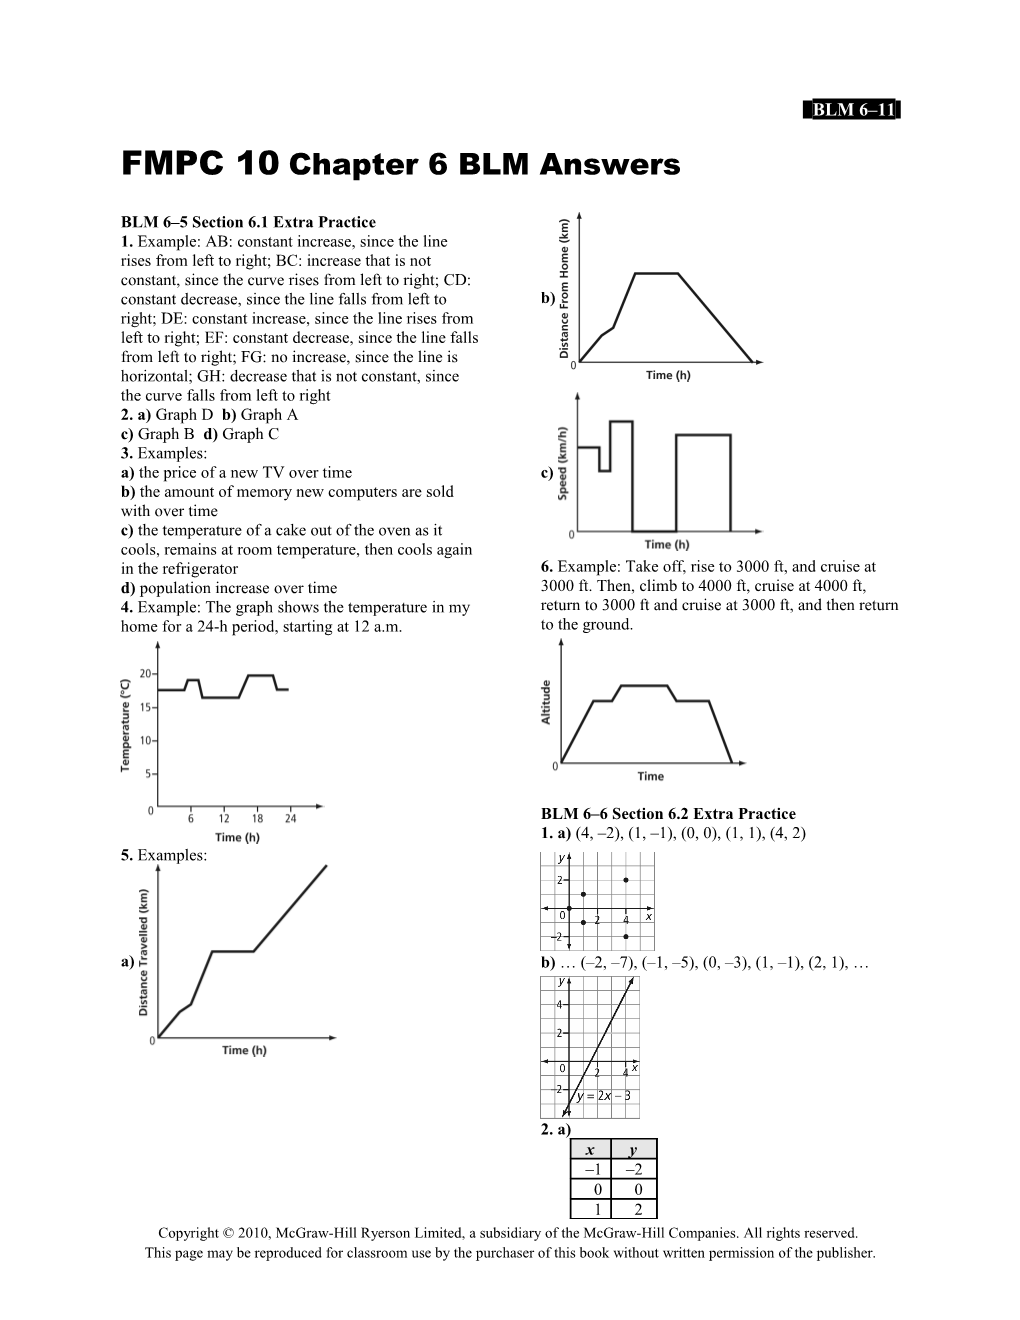 FMPC 10Chapter 6 BLM Answers